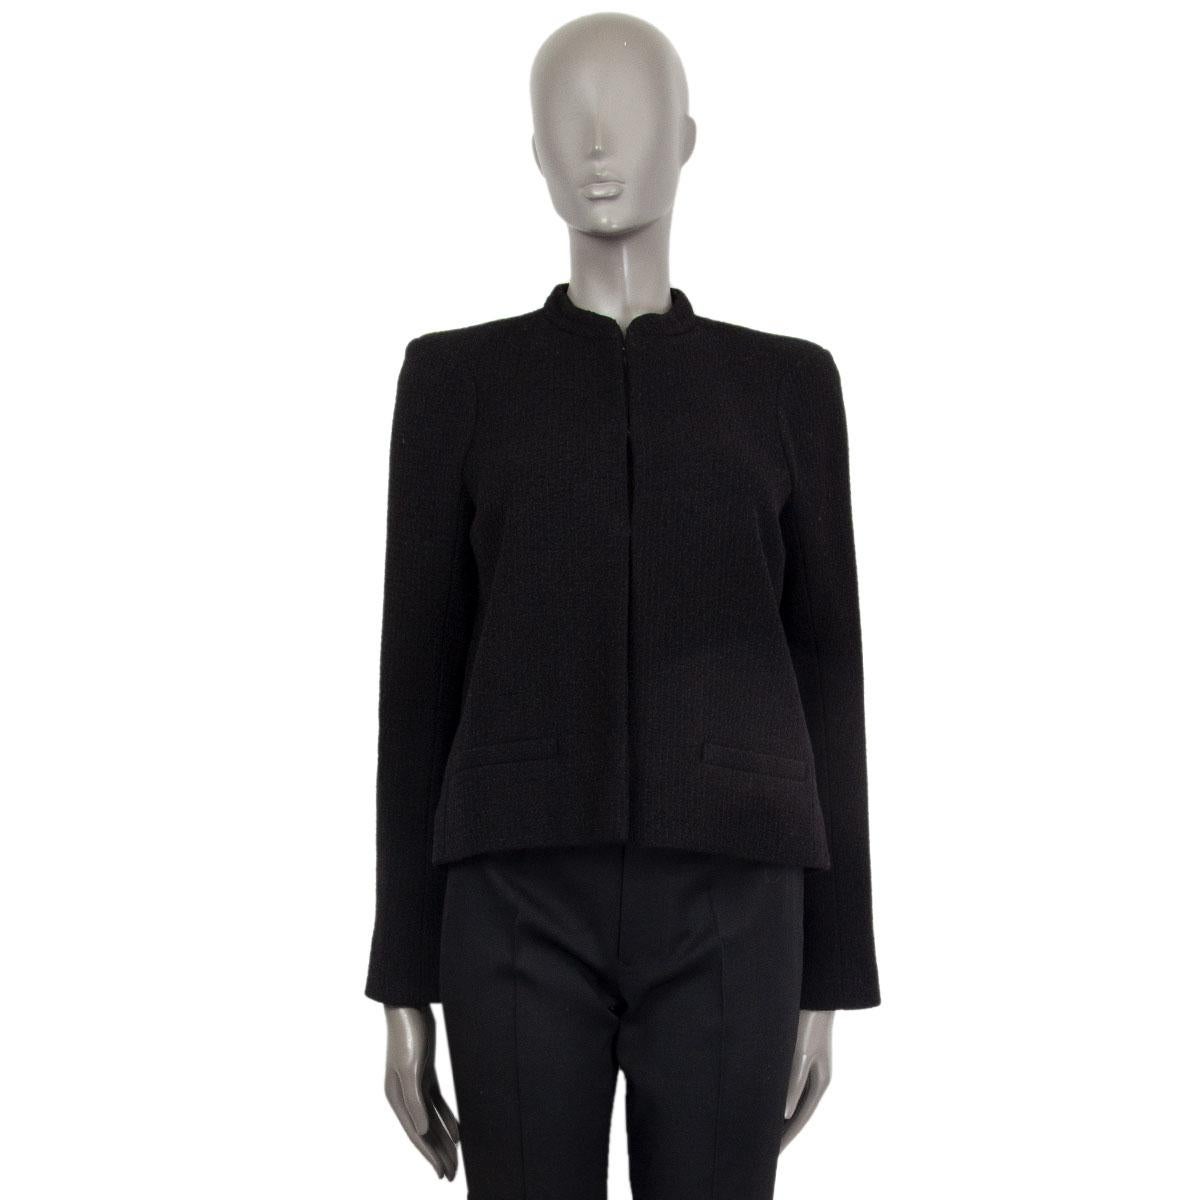 Chanel 2015 Paris-Salzburg jacket in black wool (95%) and nylon (5%) with a mandarin neckline, small front pockets and embossed cuff buttons. Closes on the front with hook fasteners. Lined in silk (100%). Has been worn and is in excellent condition.